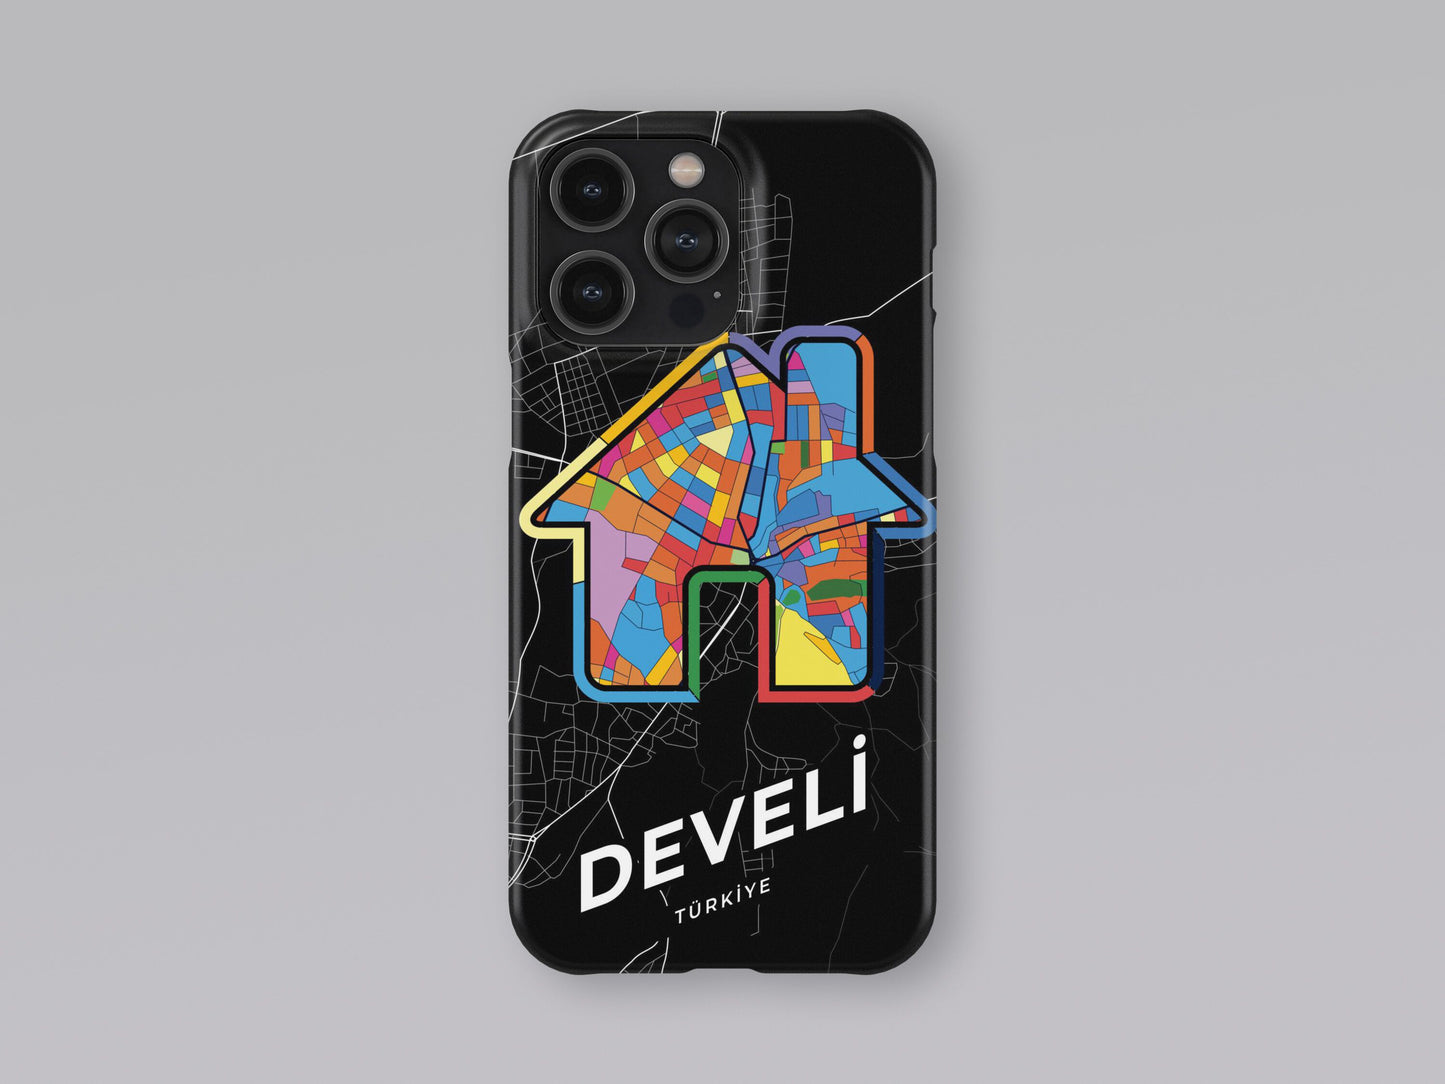 Develi Turkey slim phone case with colorful icon. Birthday, wedding or housewarming gift. Couple match cases. 3